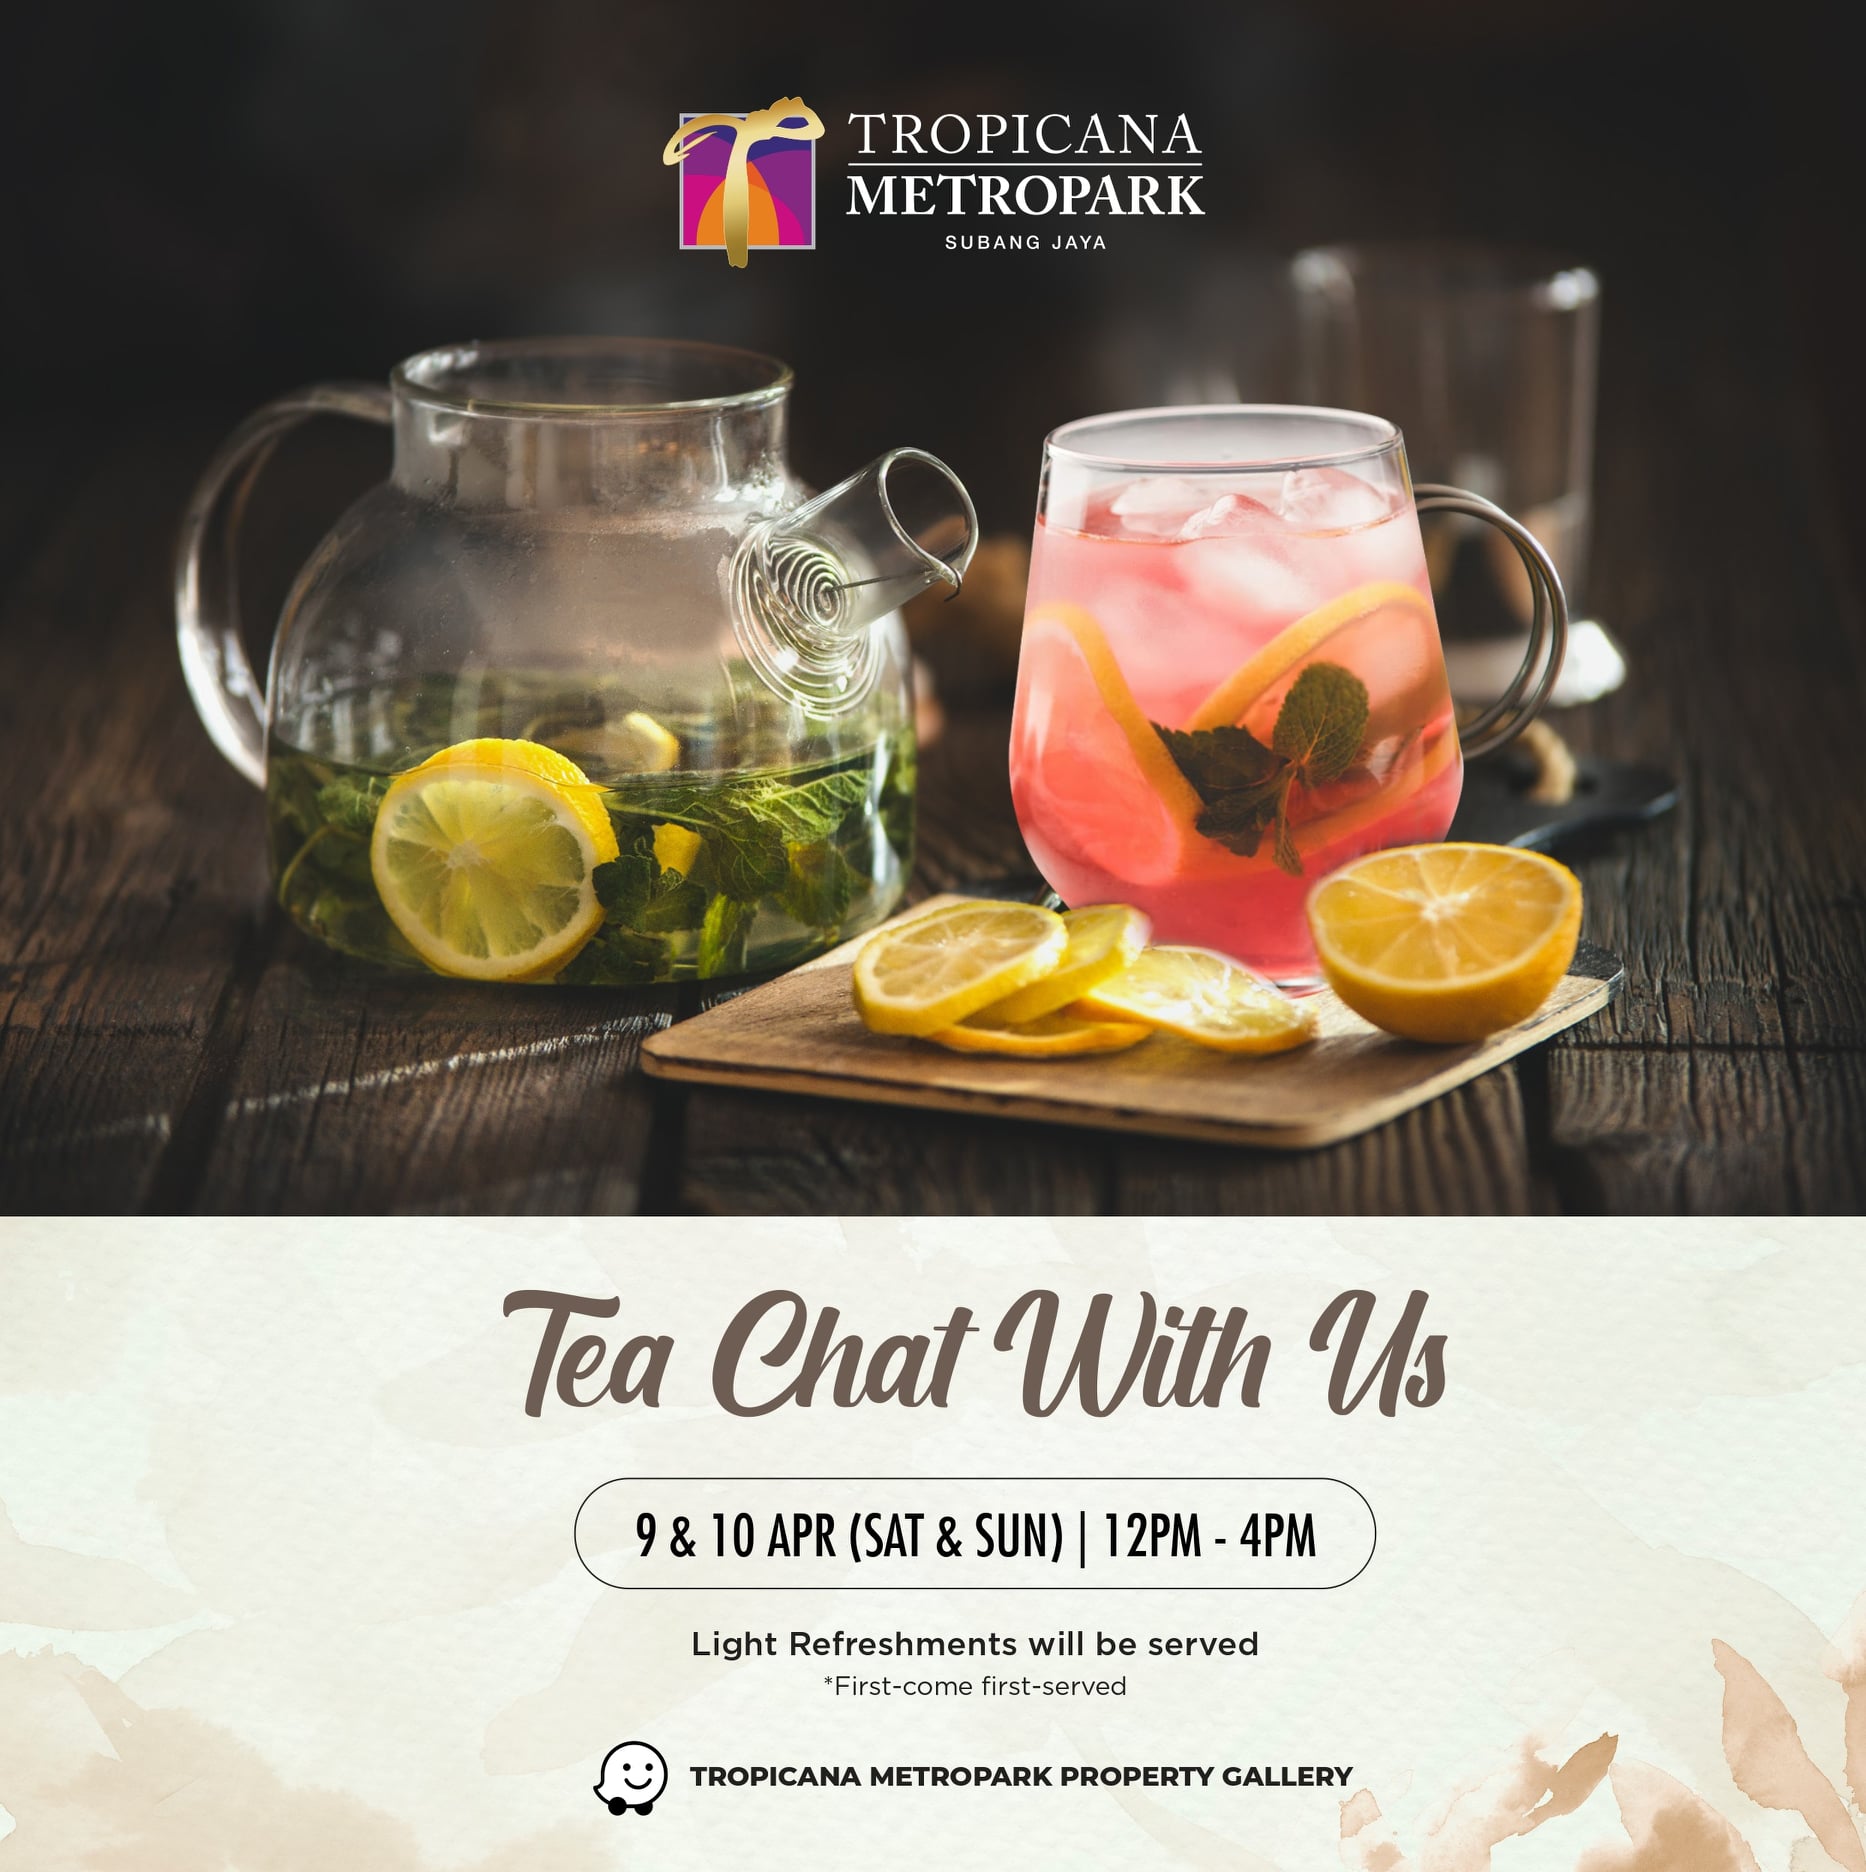 Tea Chat With Us